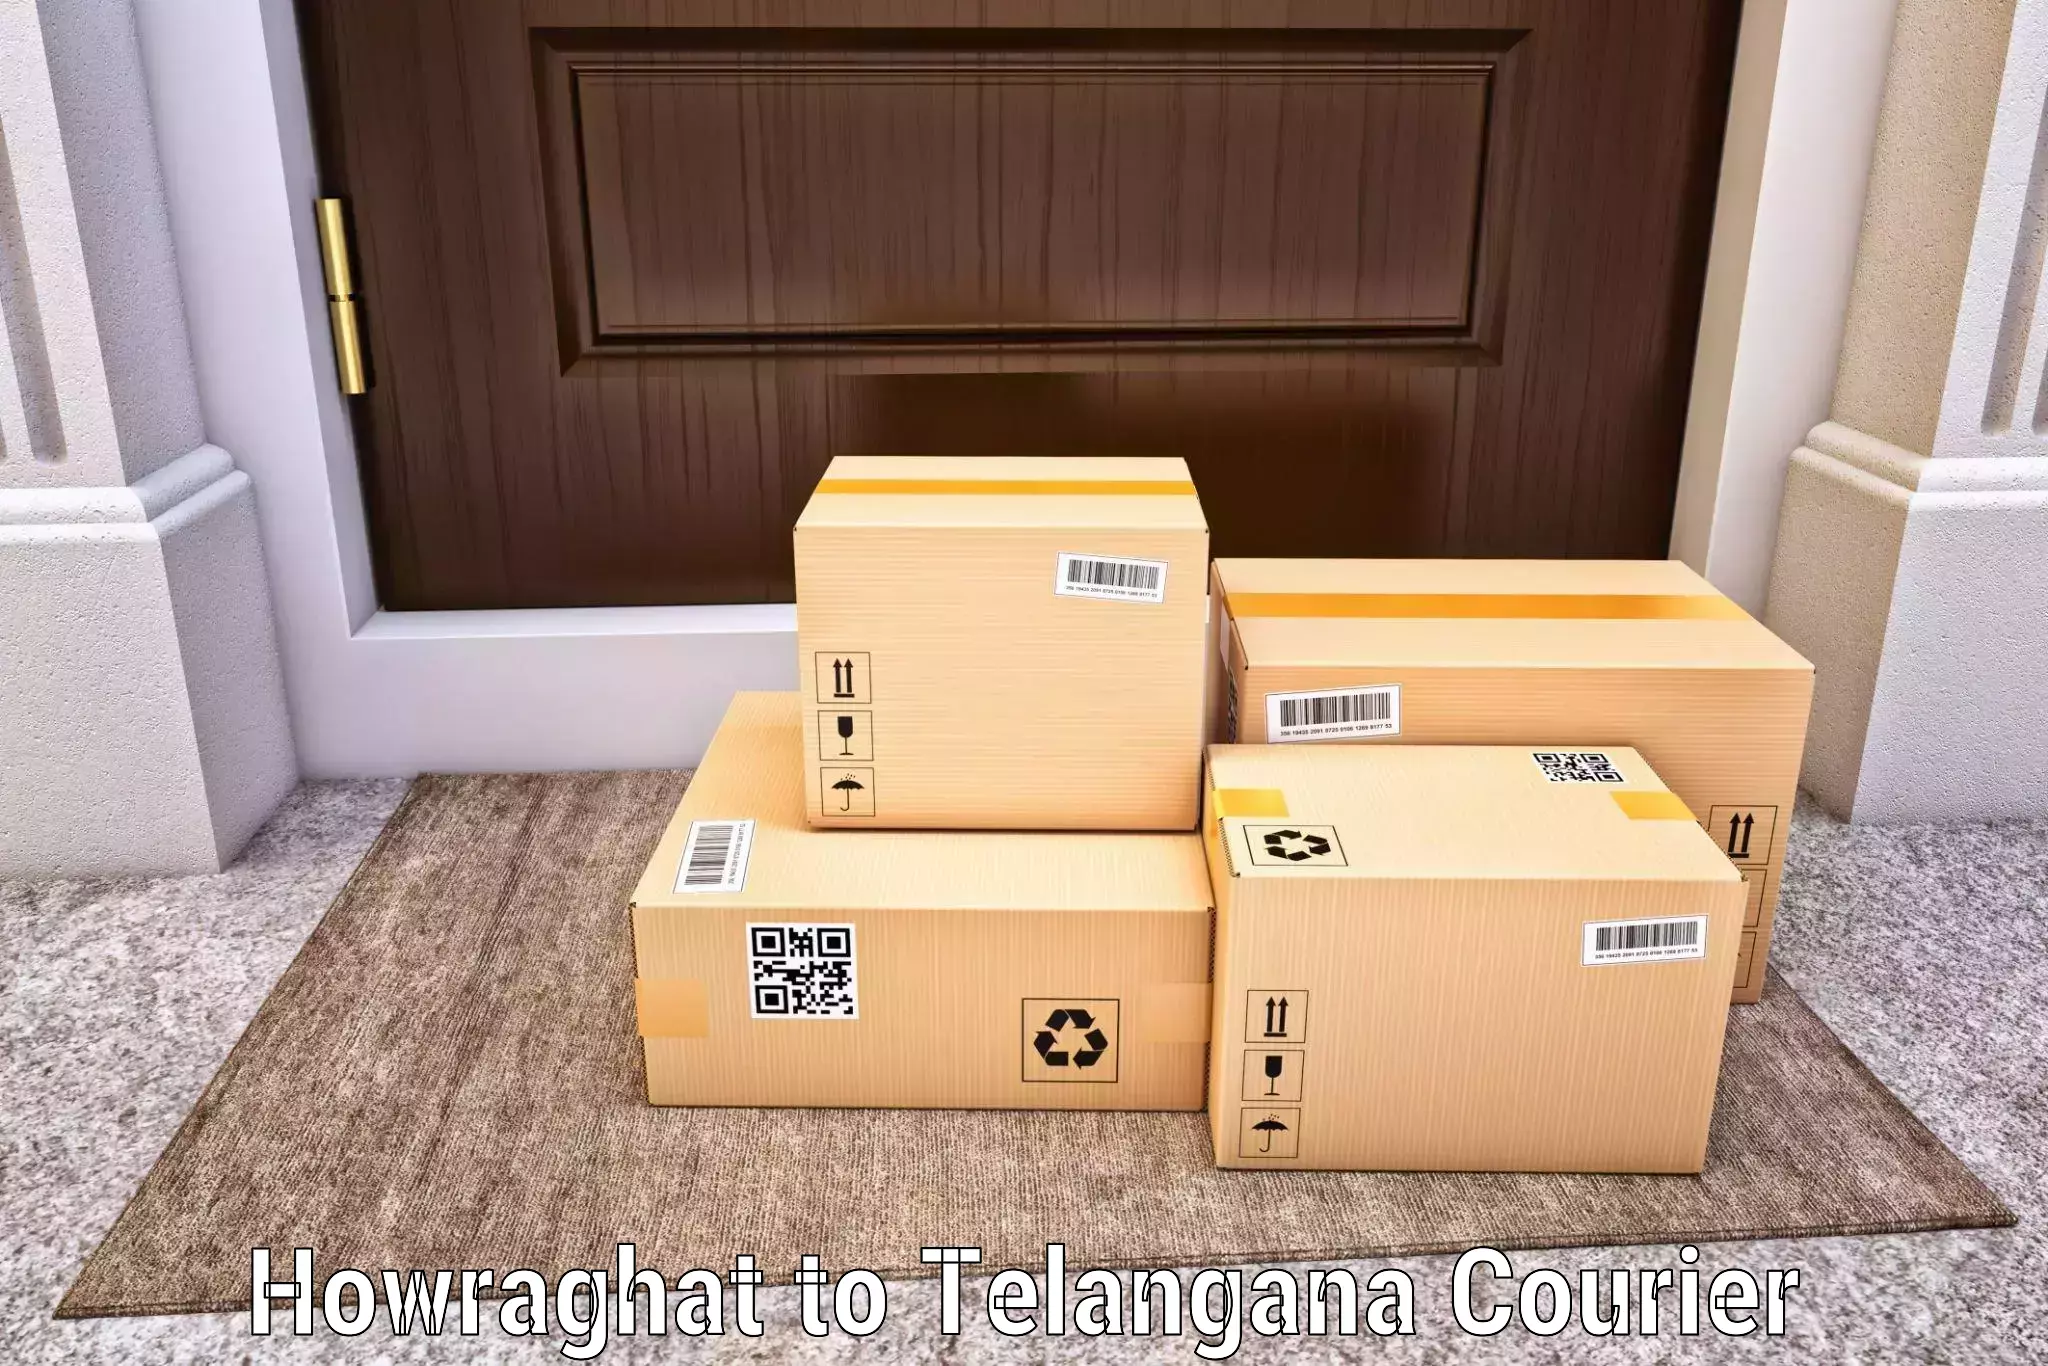 Efficient courier operations Howraghat to Telangana